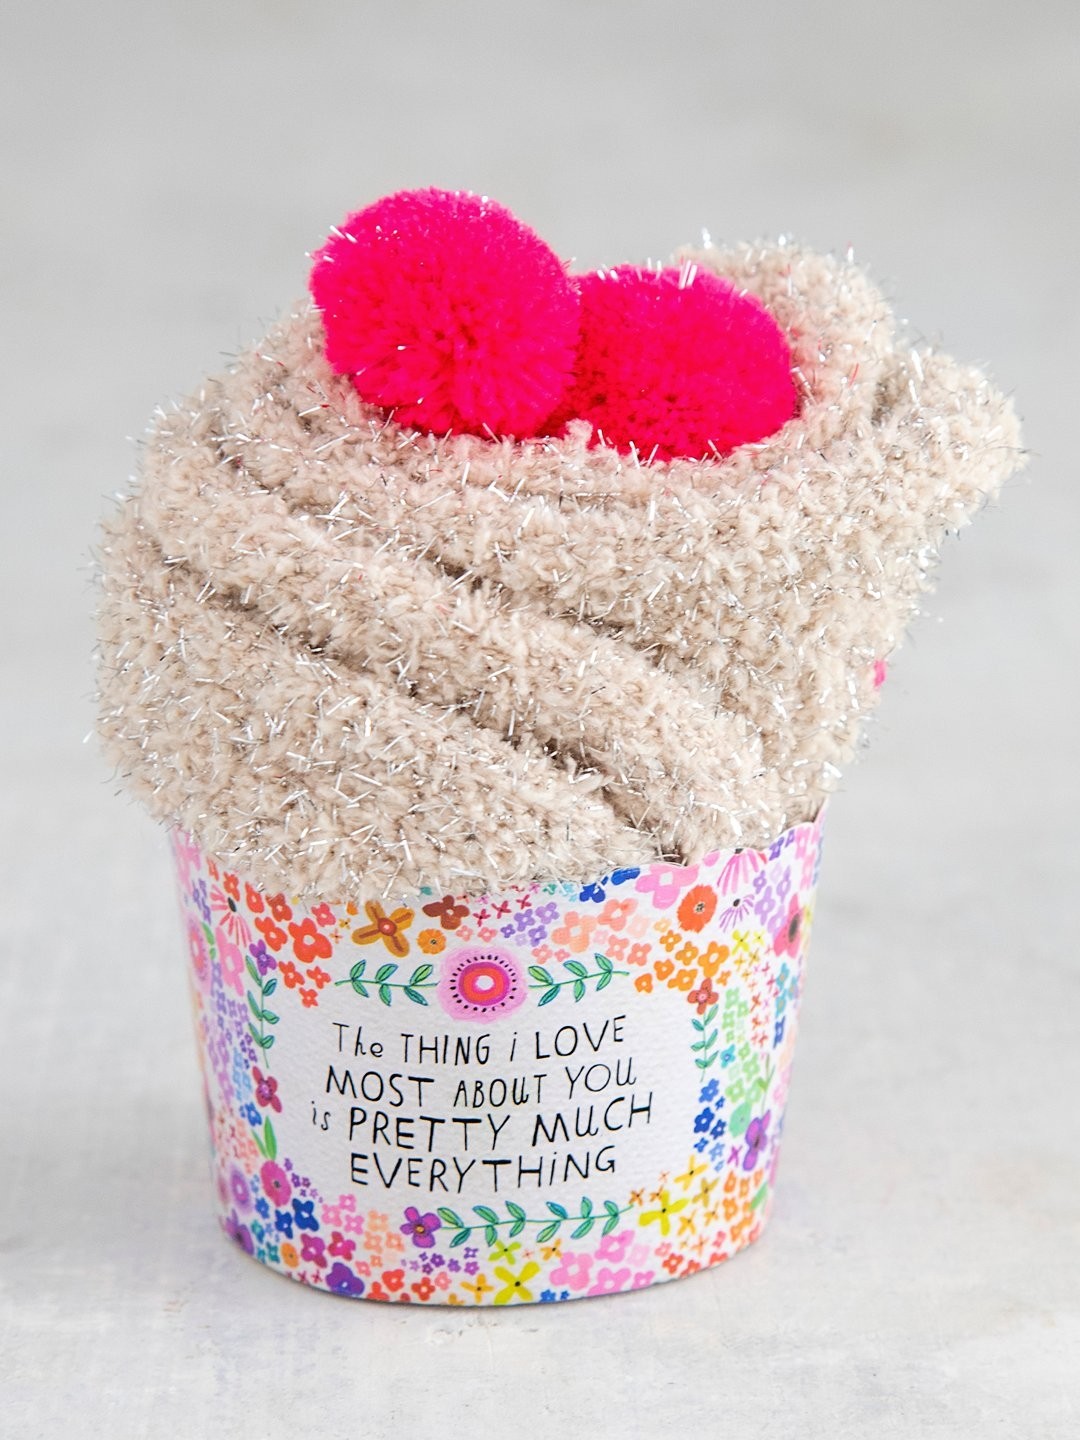 NATURAL LIFE  SOCKS CUPCAKE THE THING I LOVE MOST (ONE SIZE)